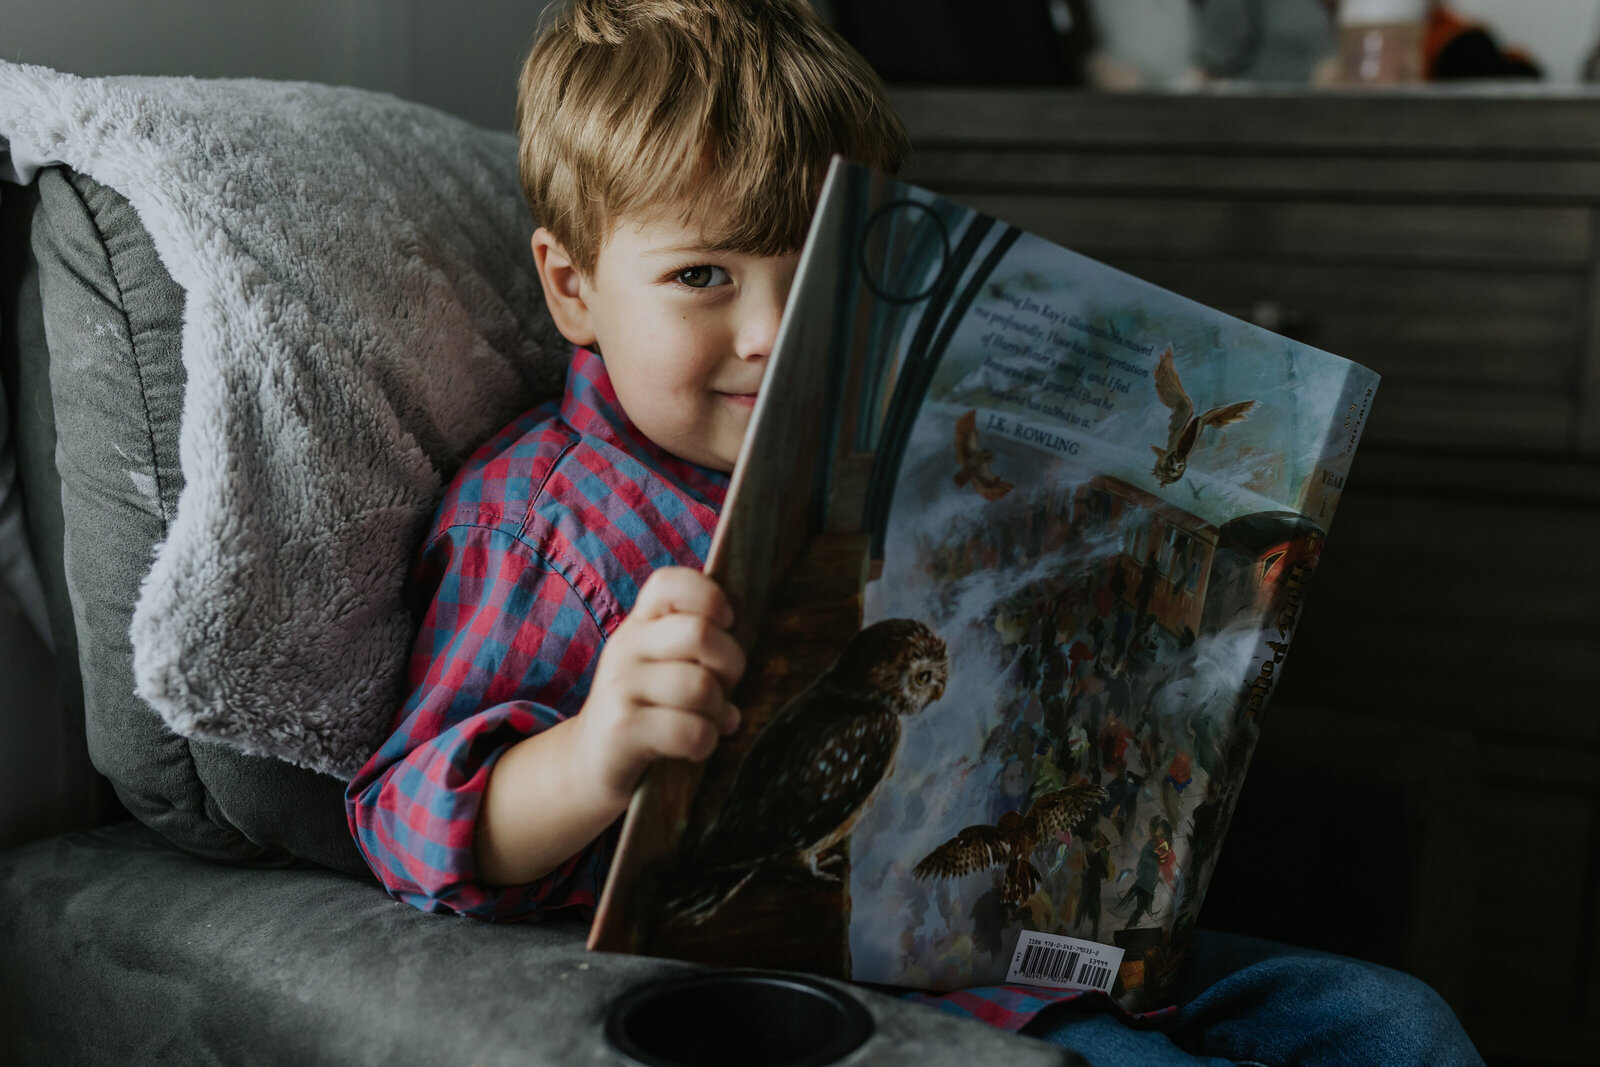 A young boy reads Harry Potter and peaks at the camera